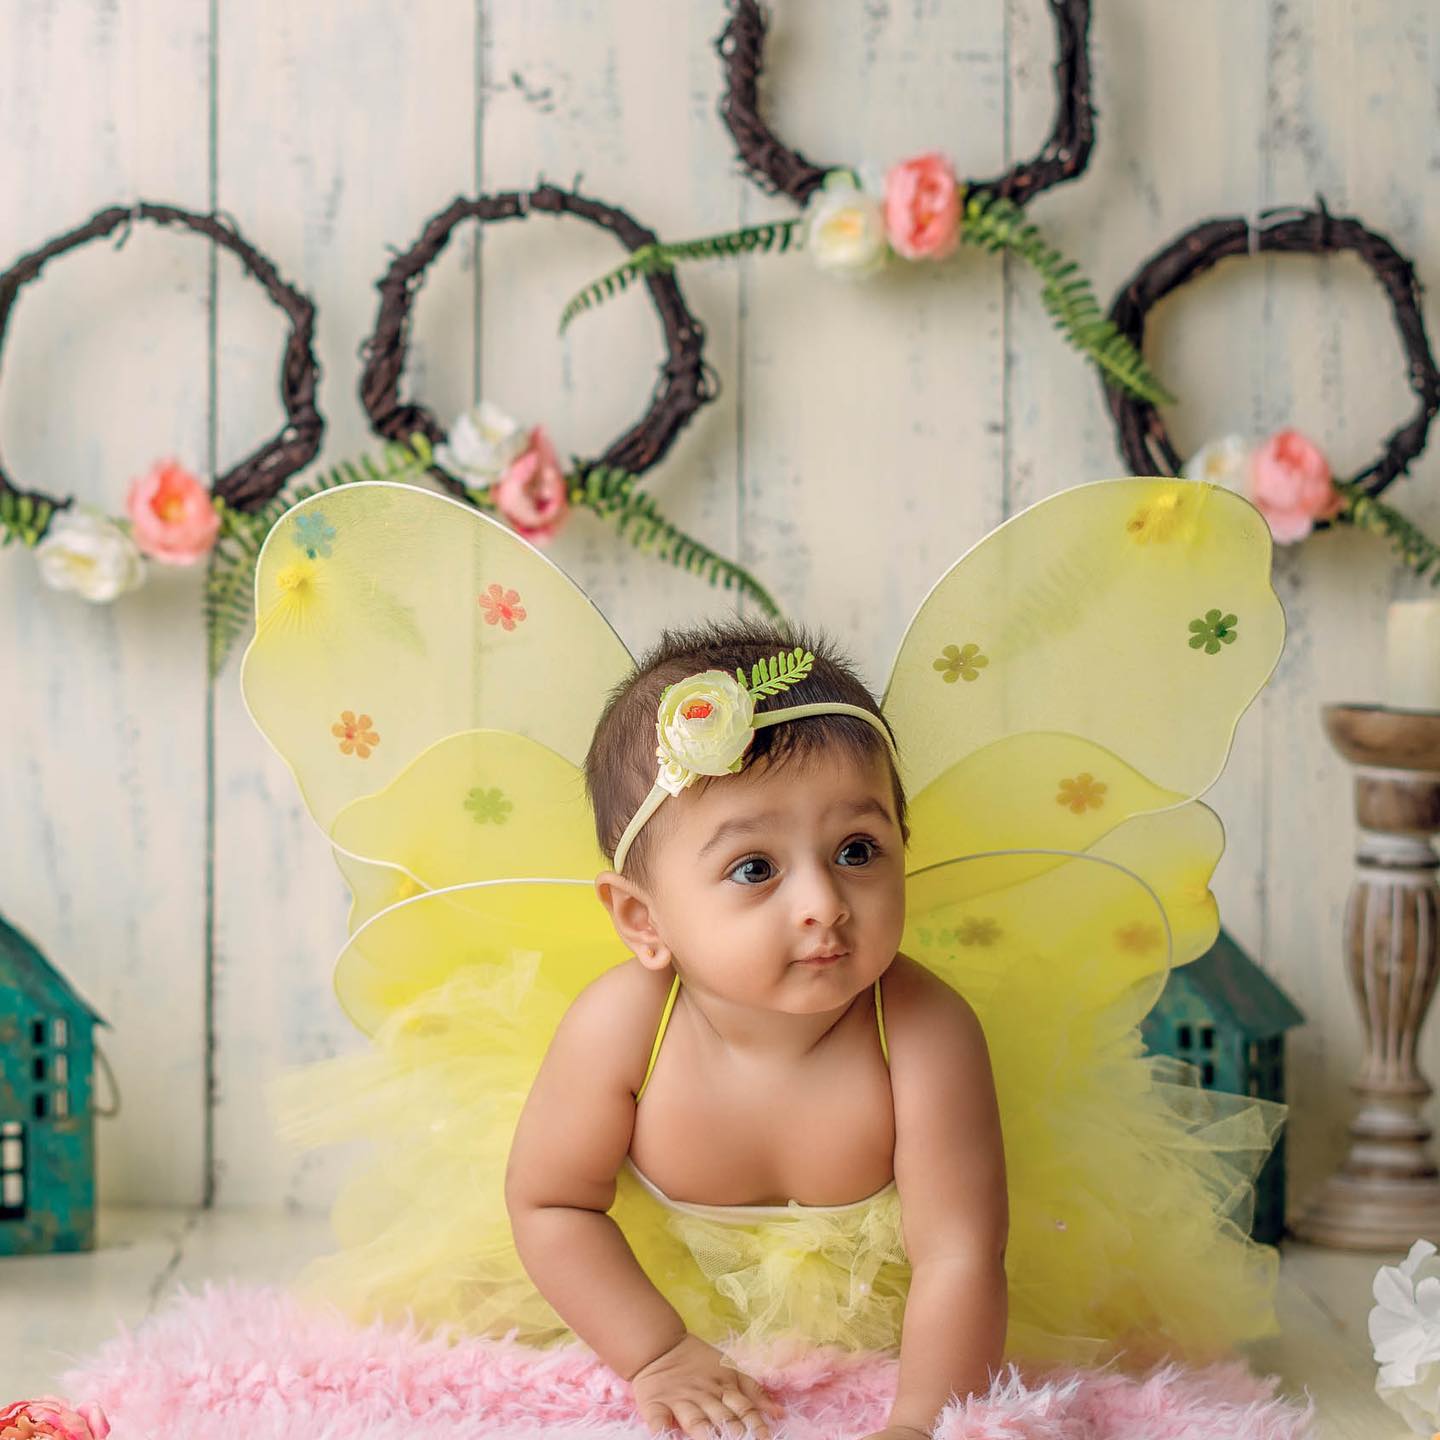 Little Dimples By Tisha works hard to capture precious moments in Kids Photographers In Bangalore , allow the little to express their true emotions. Contact Us!